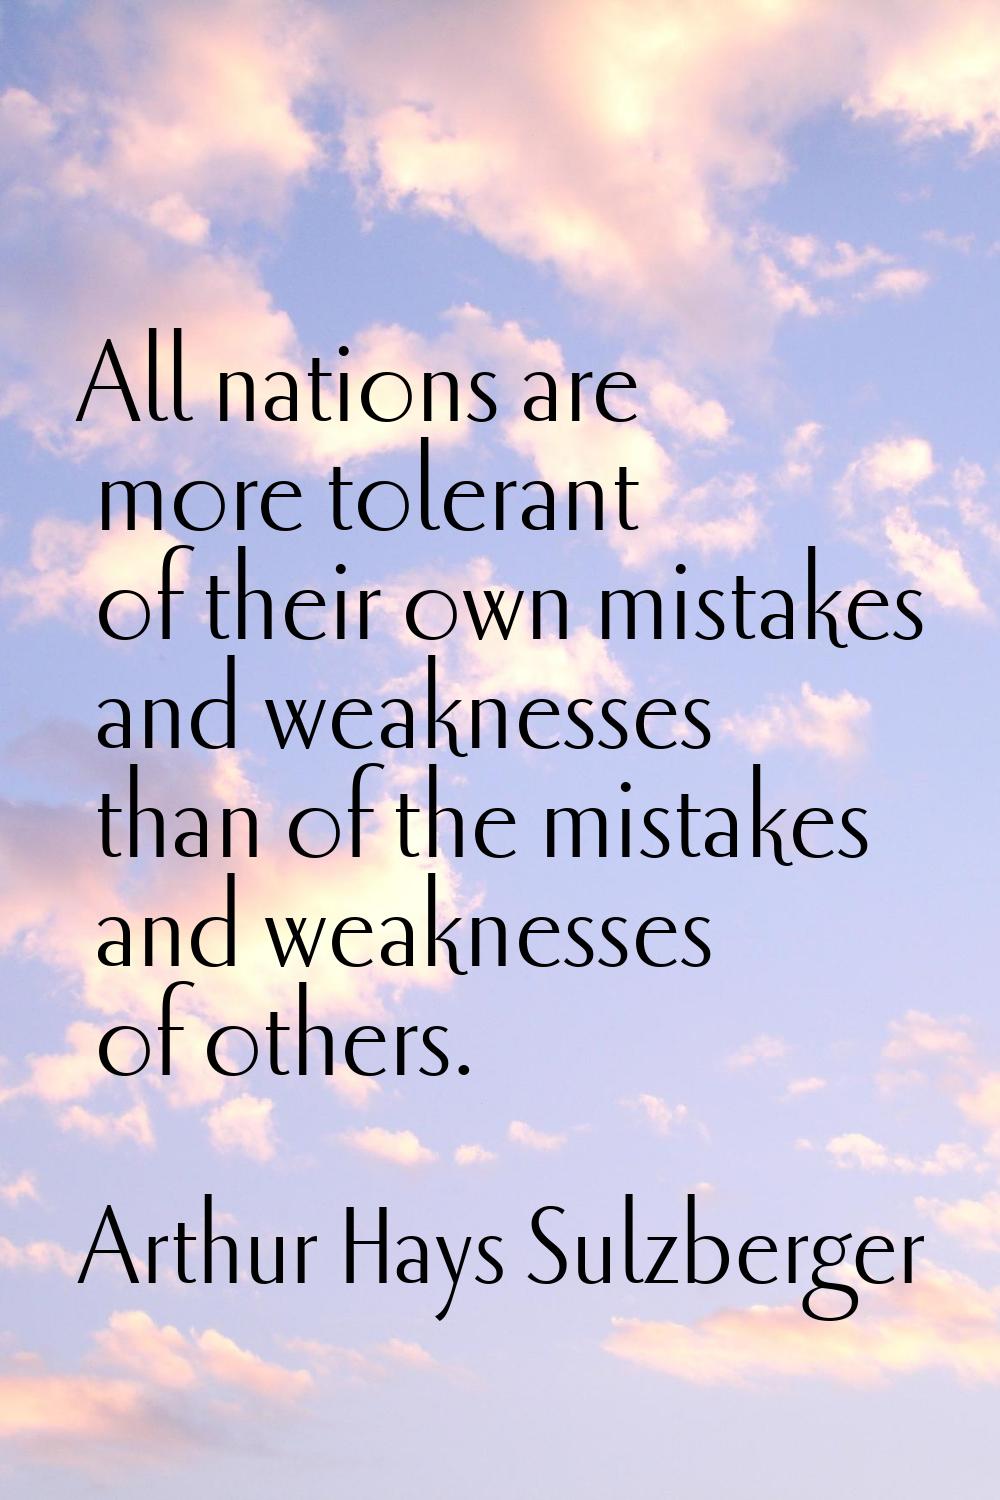 All nations are more tolerant of their own mistakes and weaknesses than of the mistakes and weaknes